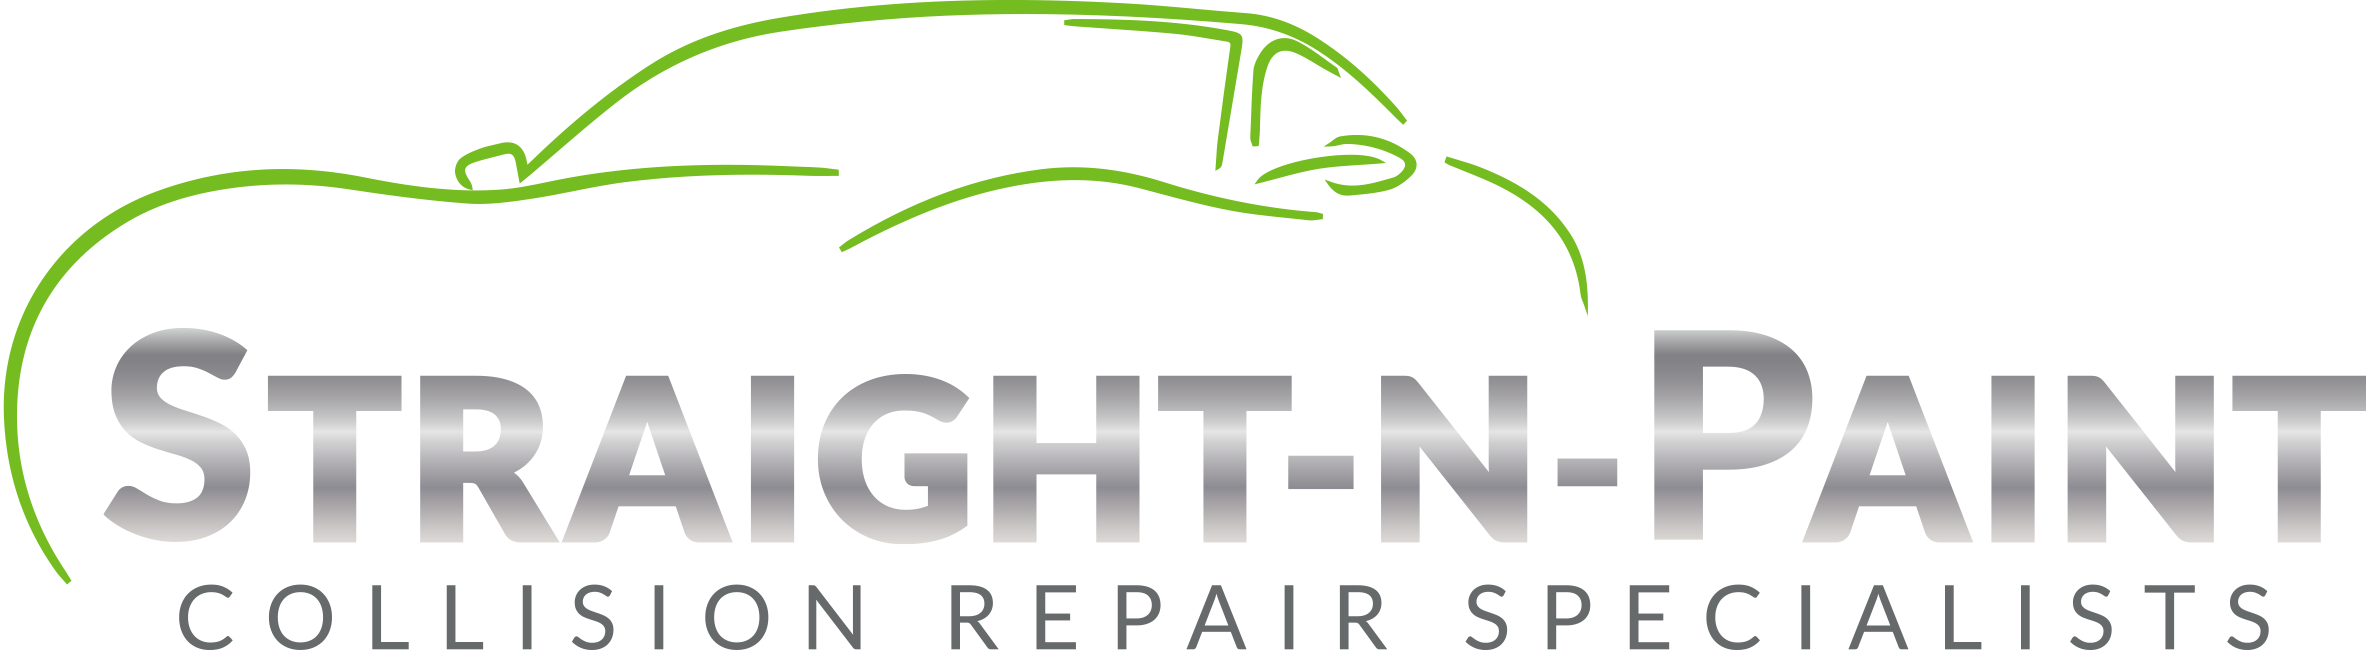 Straight-N-Paint | COLLISION REPAIR SPECIALISTS